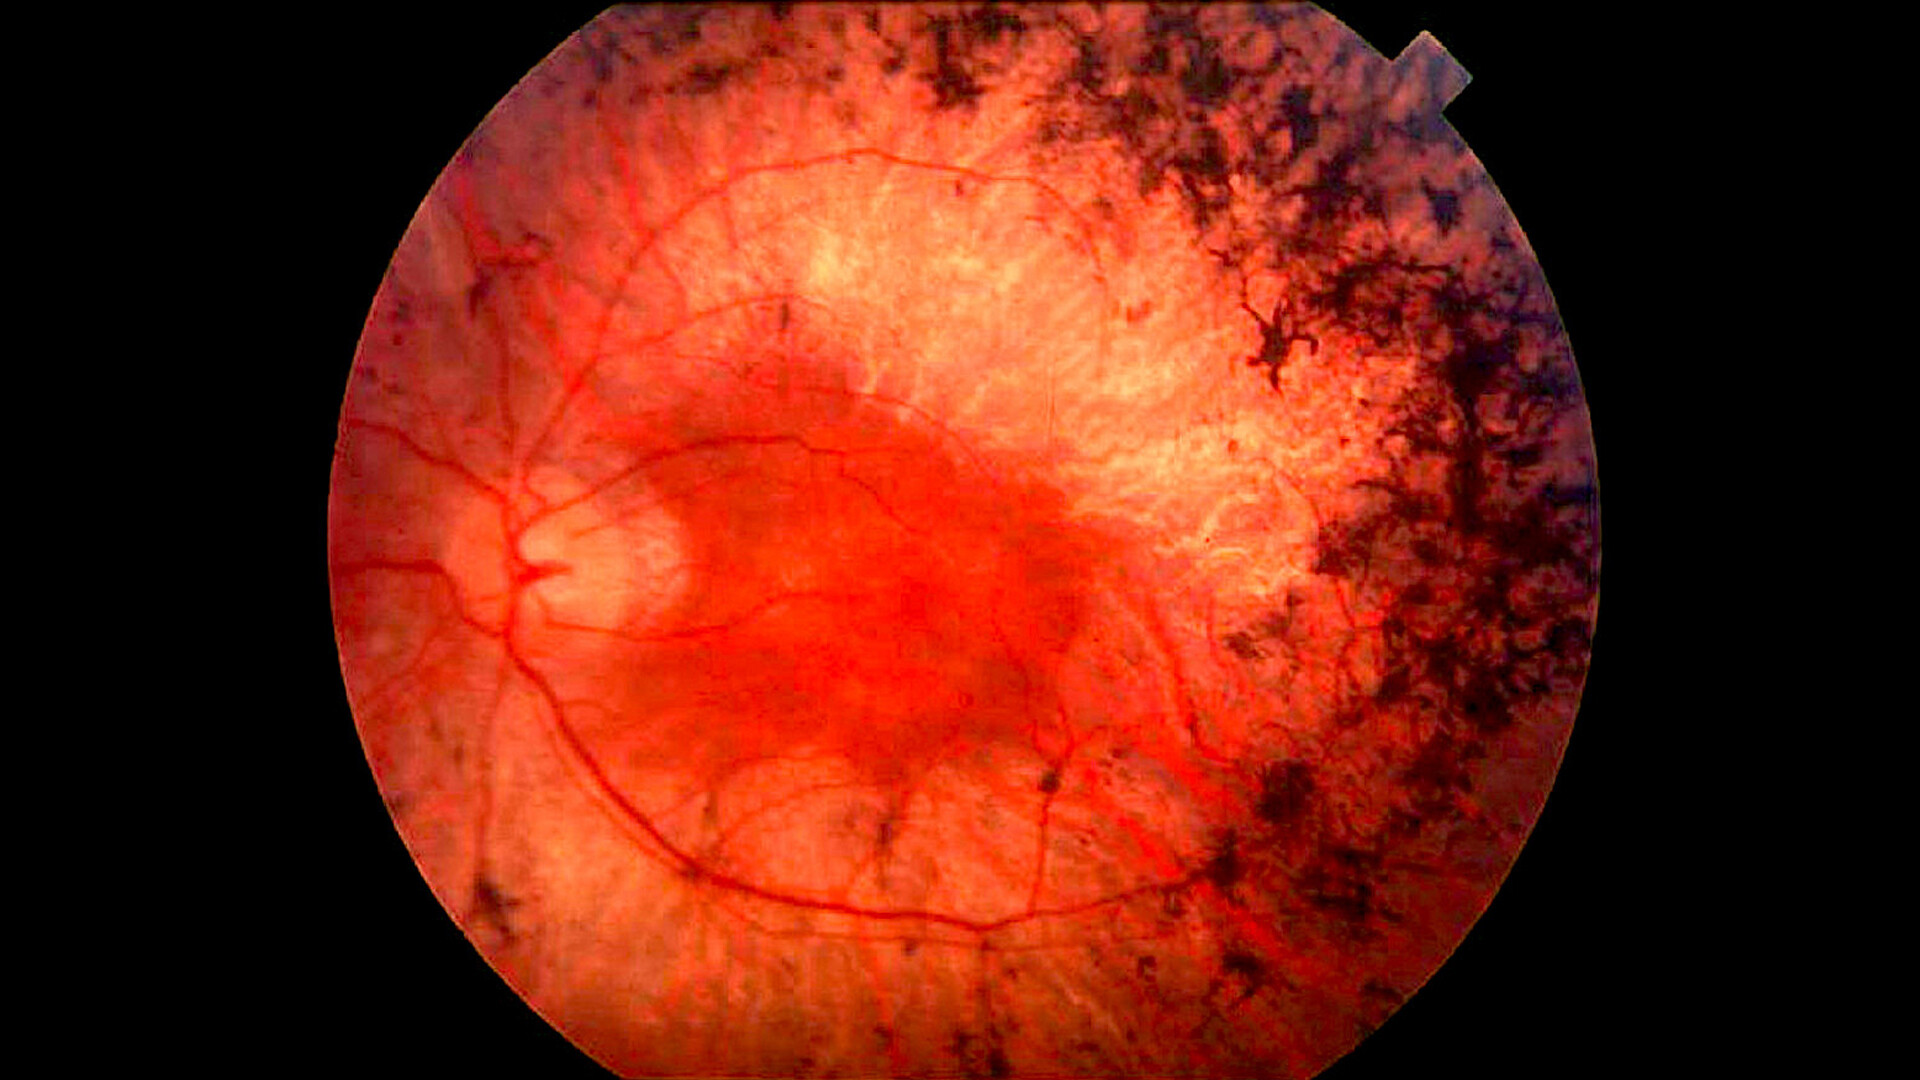 retinitis pigmentosa before and after